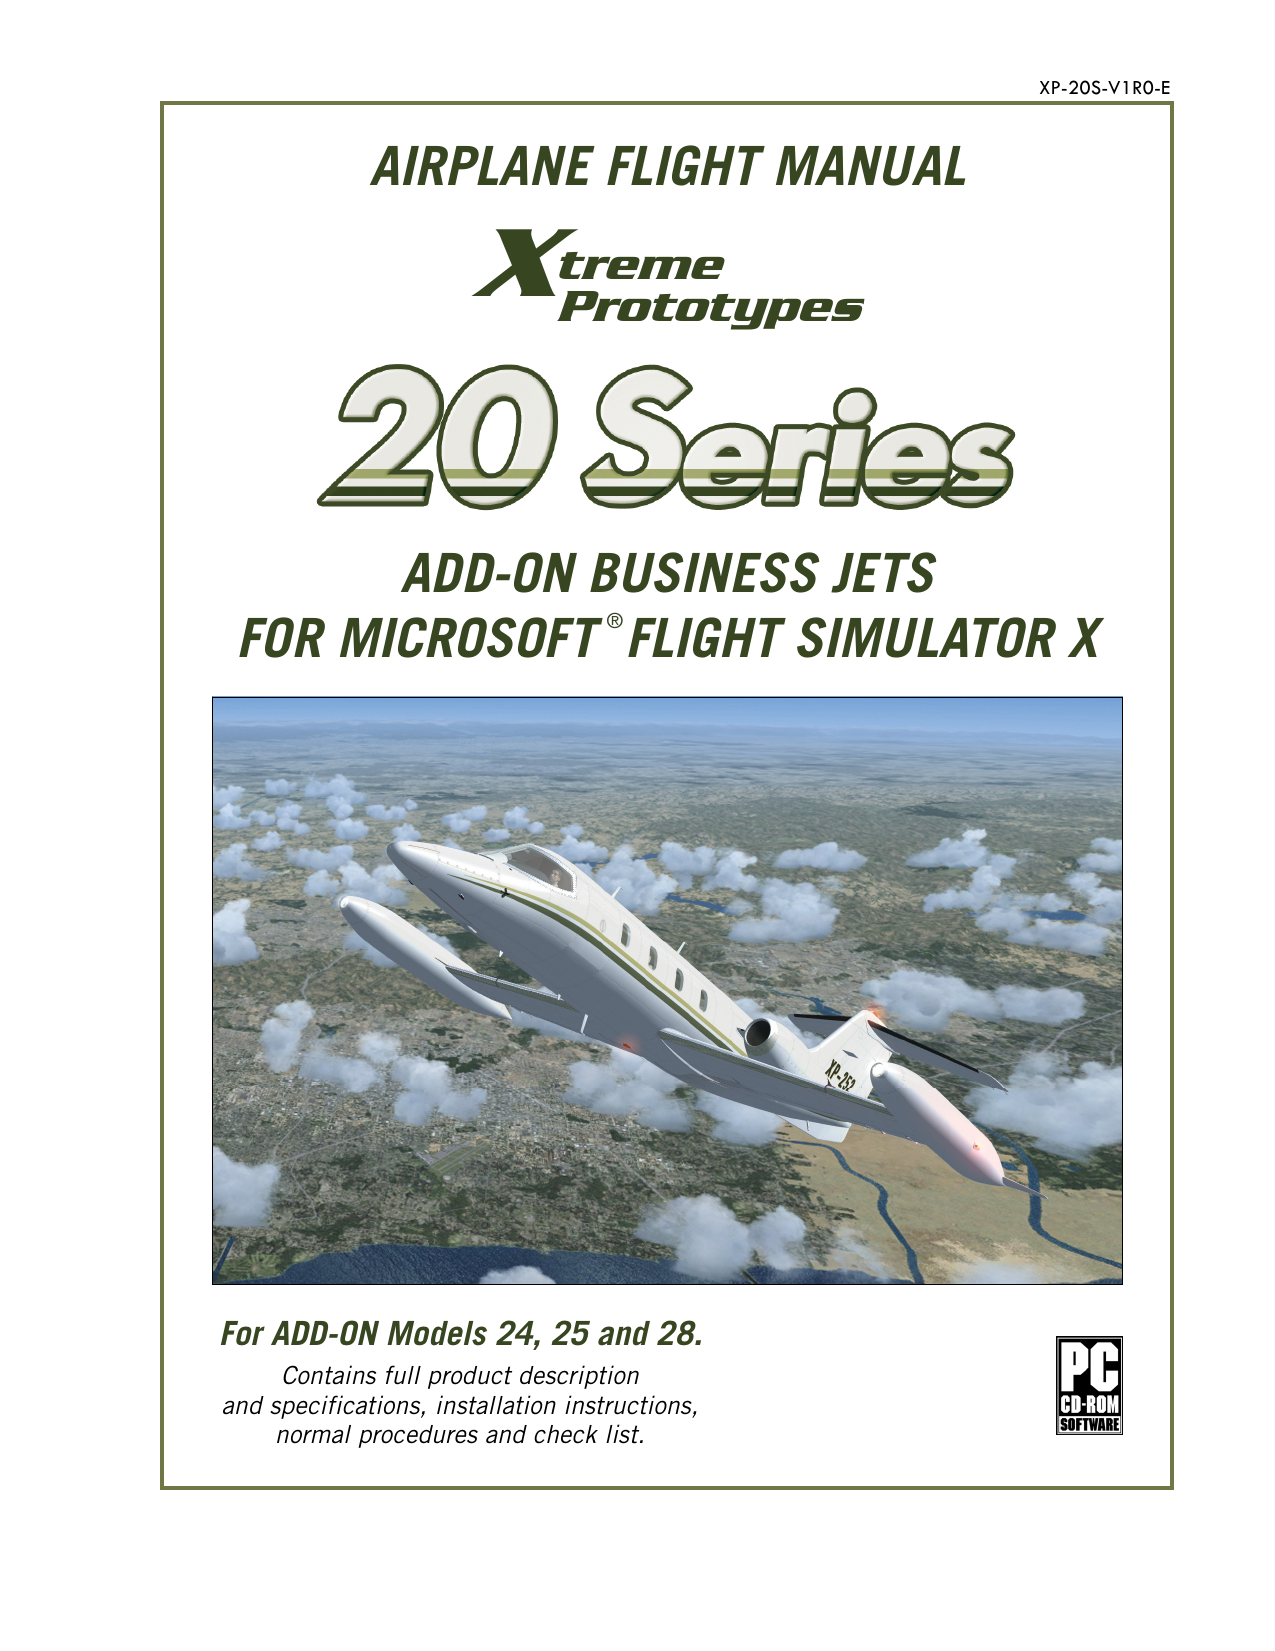 activating fsx acceleration